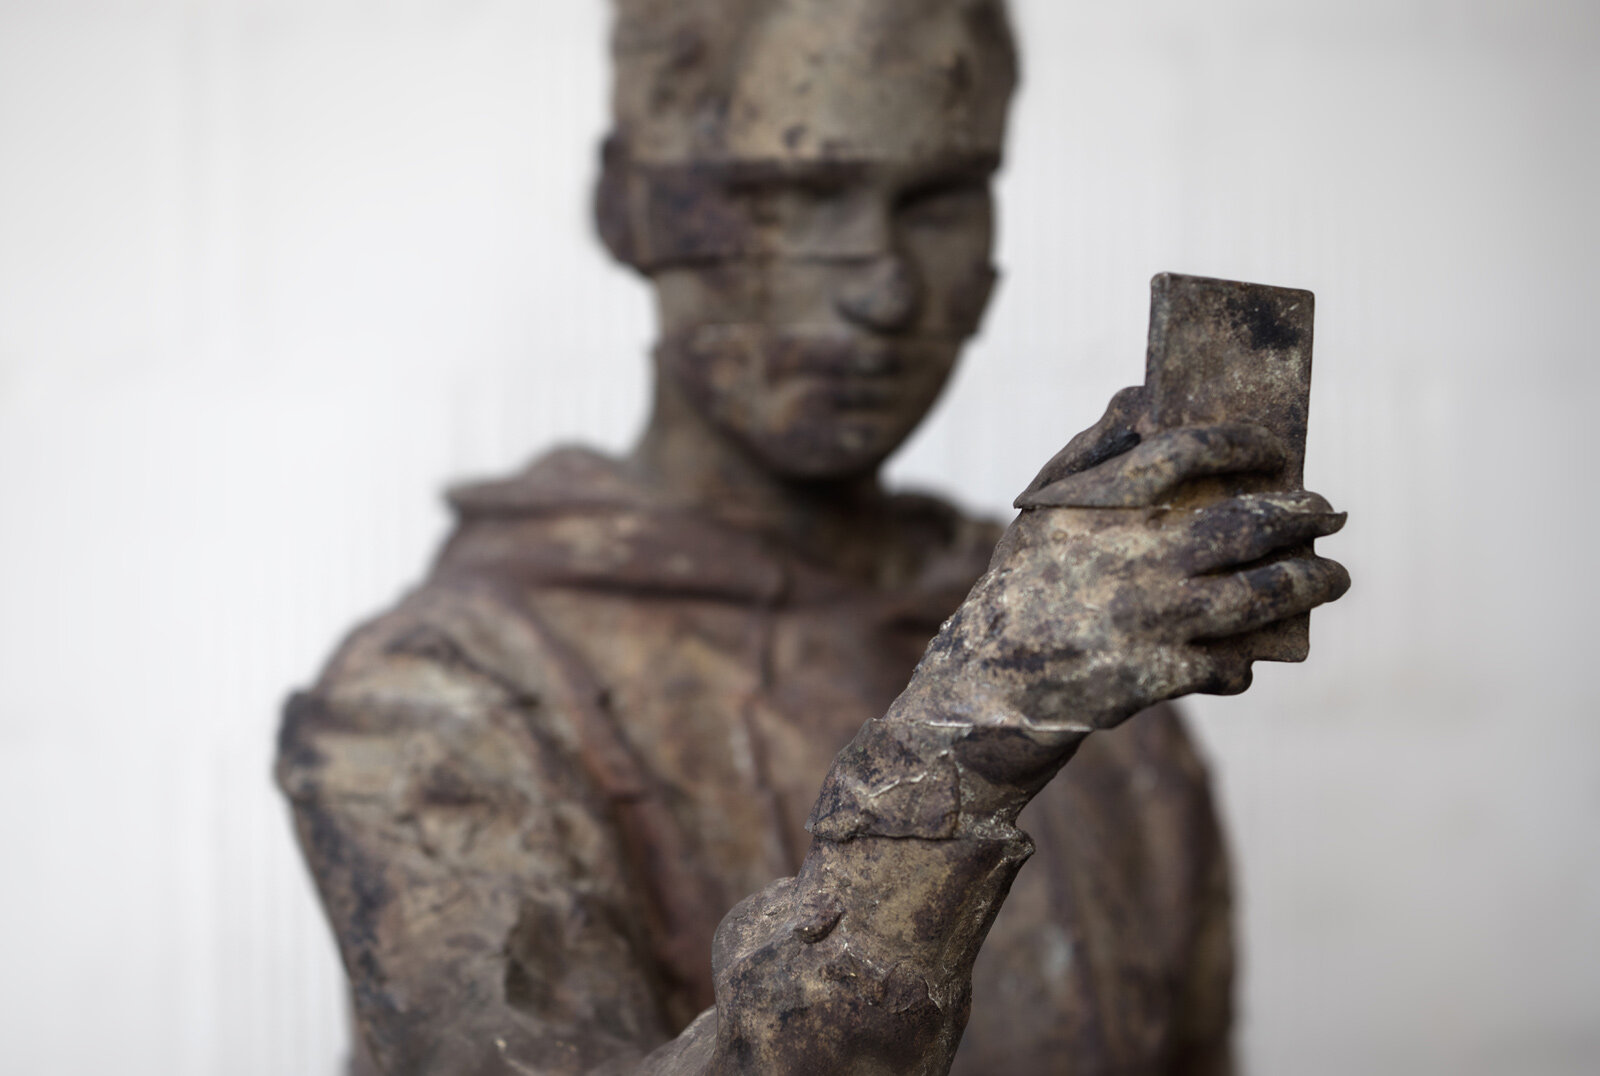   Selfie , 2016 Brass, 200 x 69 x 57 cm Private collection 